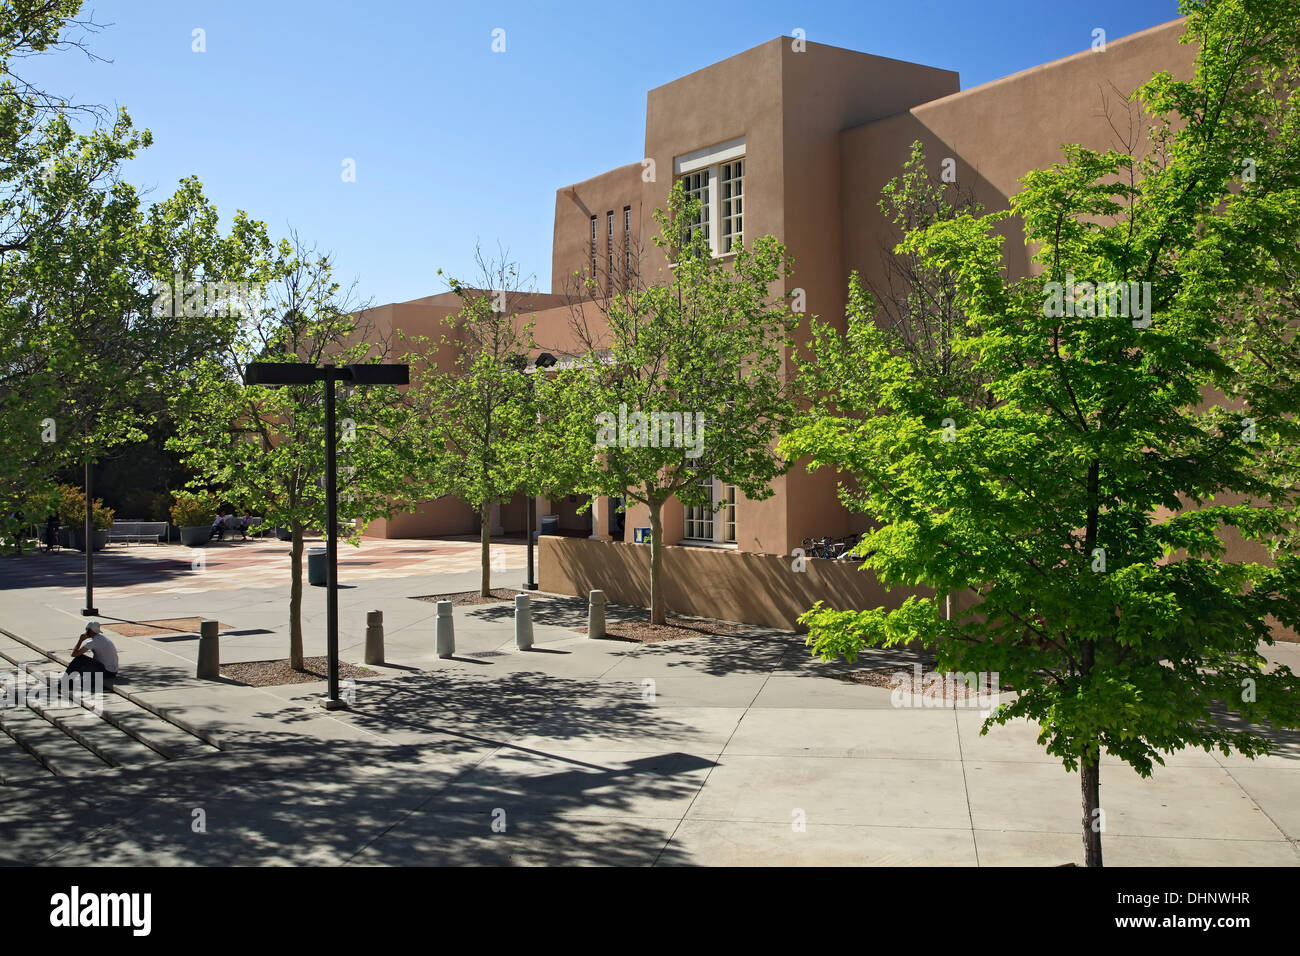 Main entrance and student on cell phone, Zimmerman Library, University of New Mexico Campus, Albuquerque, New Mexico USA Stock Photo